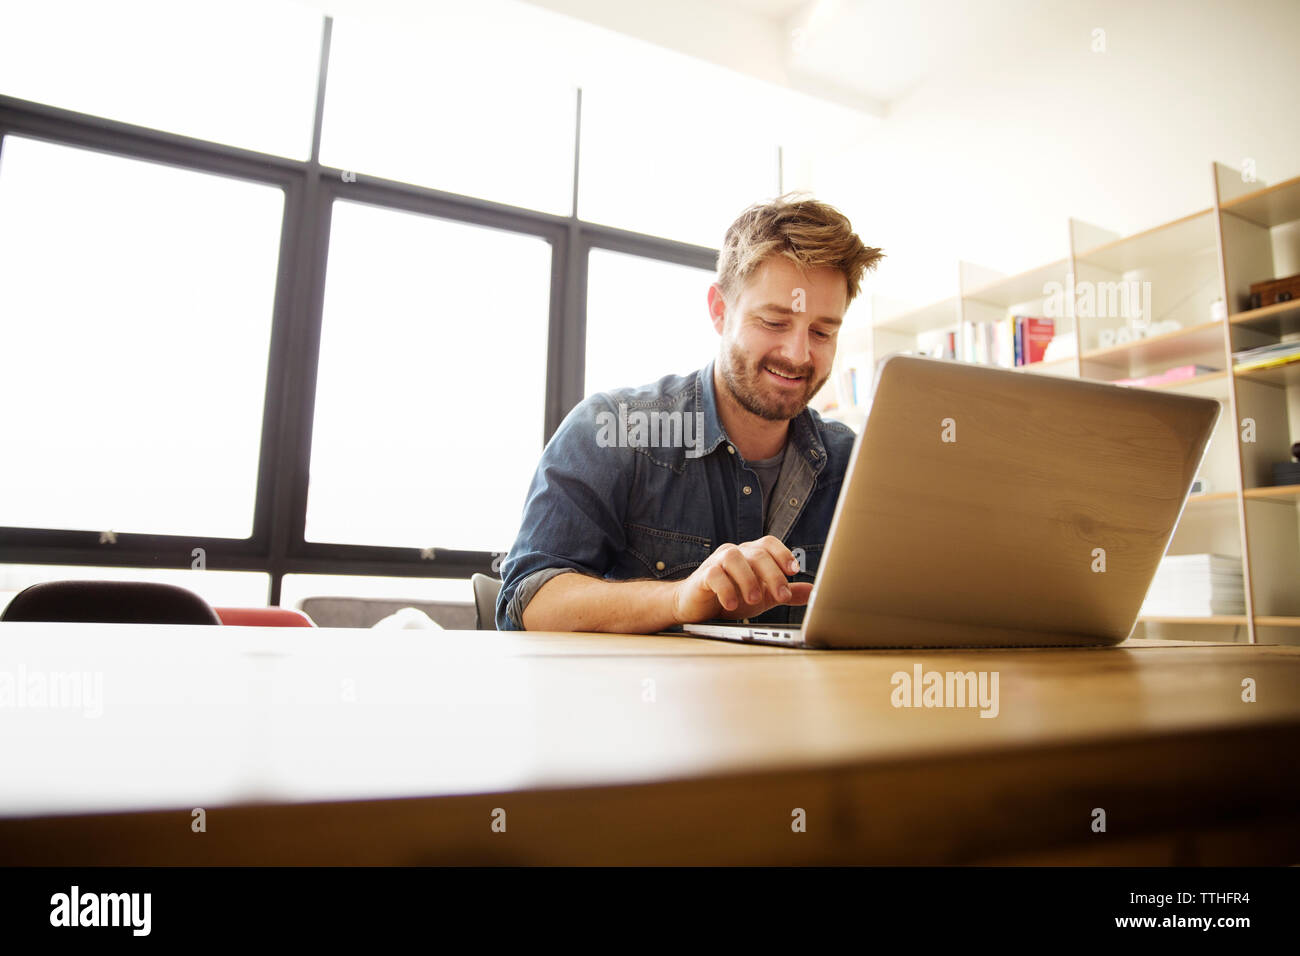 Happy man using laptop at table Banque D'Images